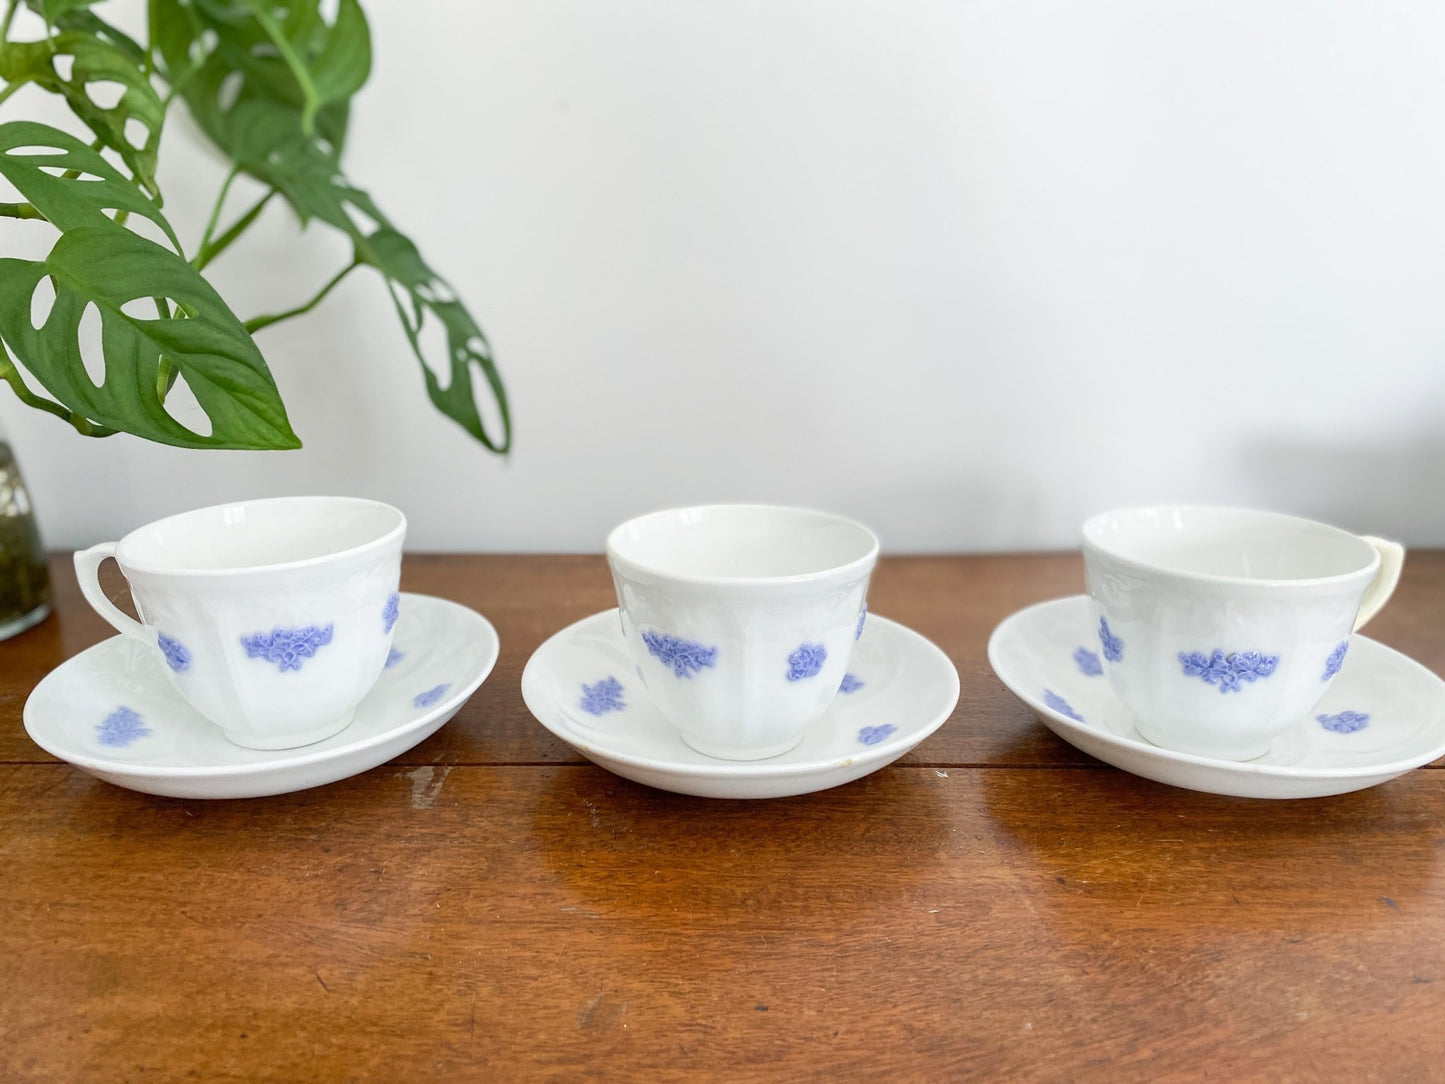 There are three cups in a row on a wooden table. The teacups are all upright but the handle is facing separate directions. The teacups are on the saucers and show the blue or violet colours. The left shows a Monstera plant